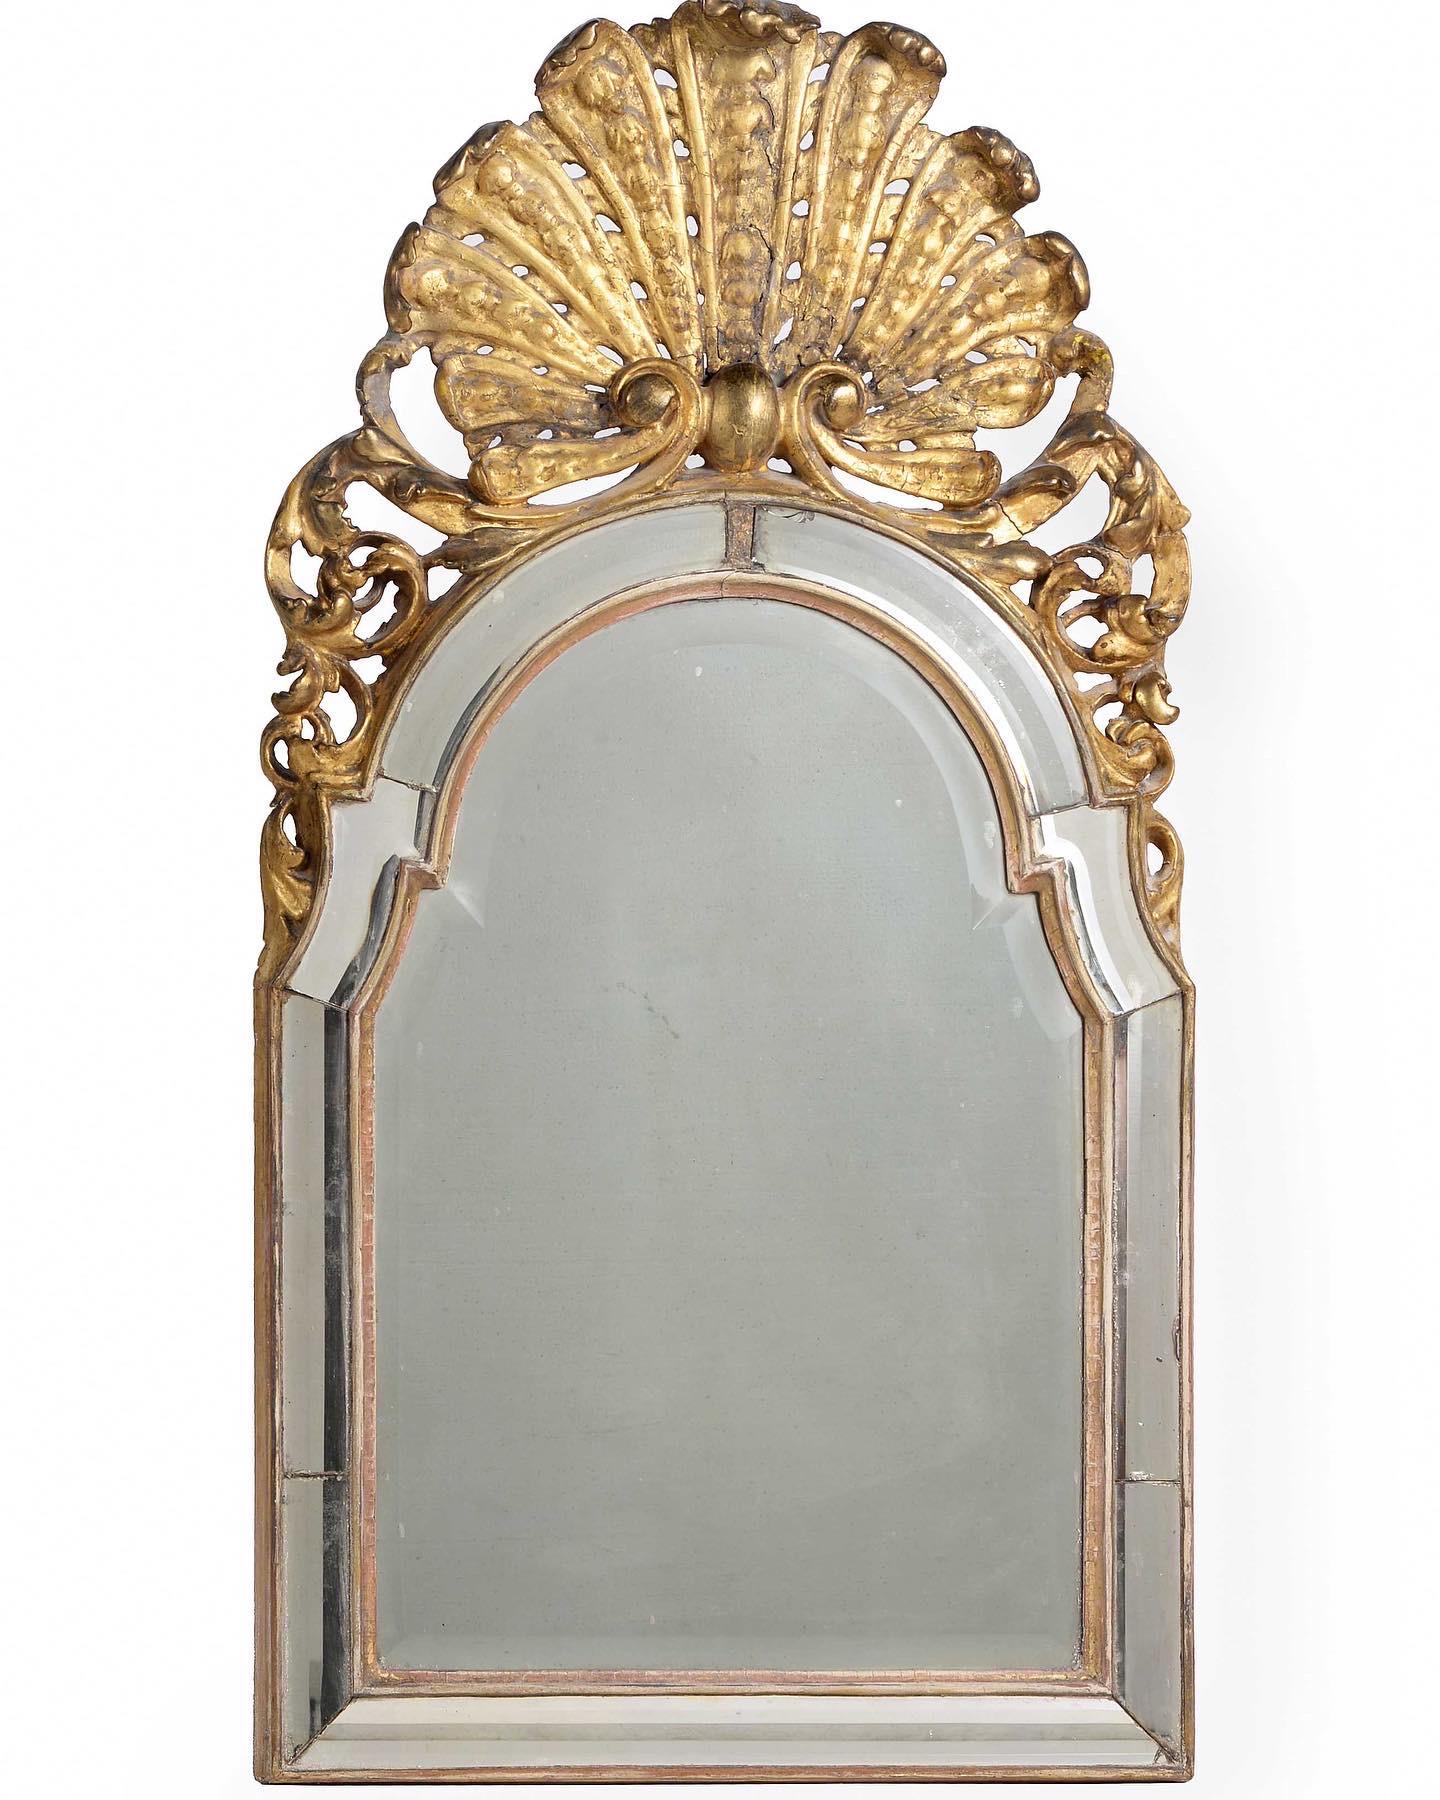 Carved Queen Anne 'Baroque Shell' Gilt Mirror, c.1710